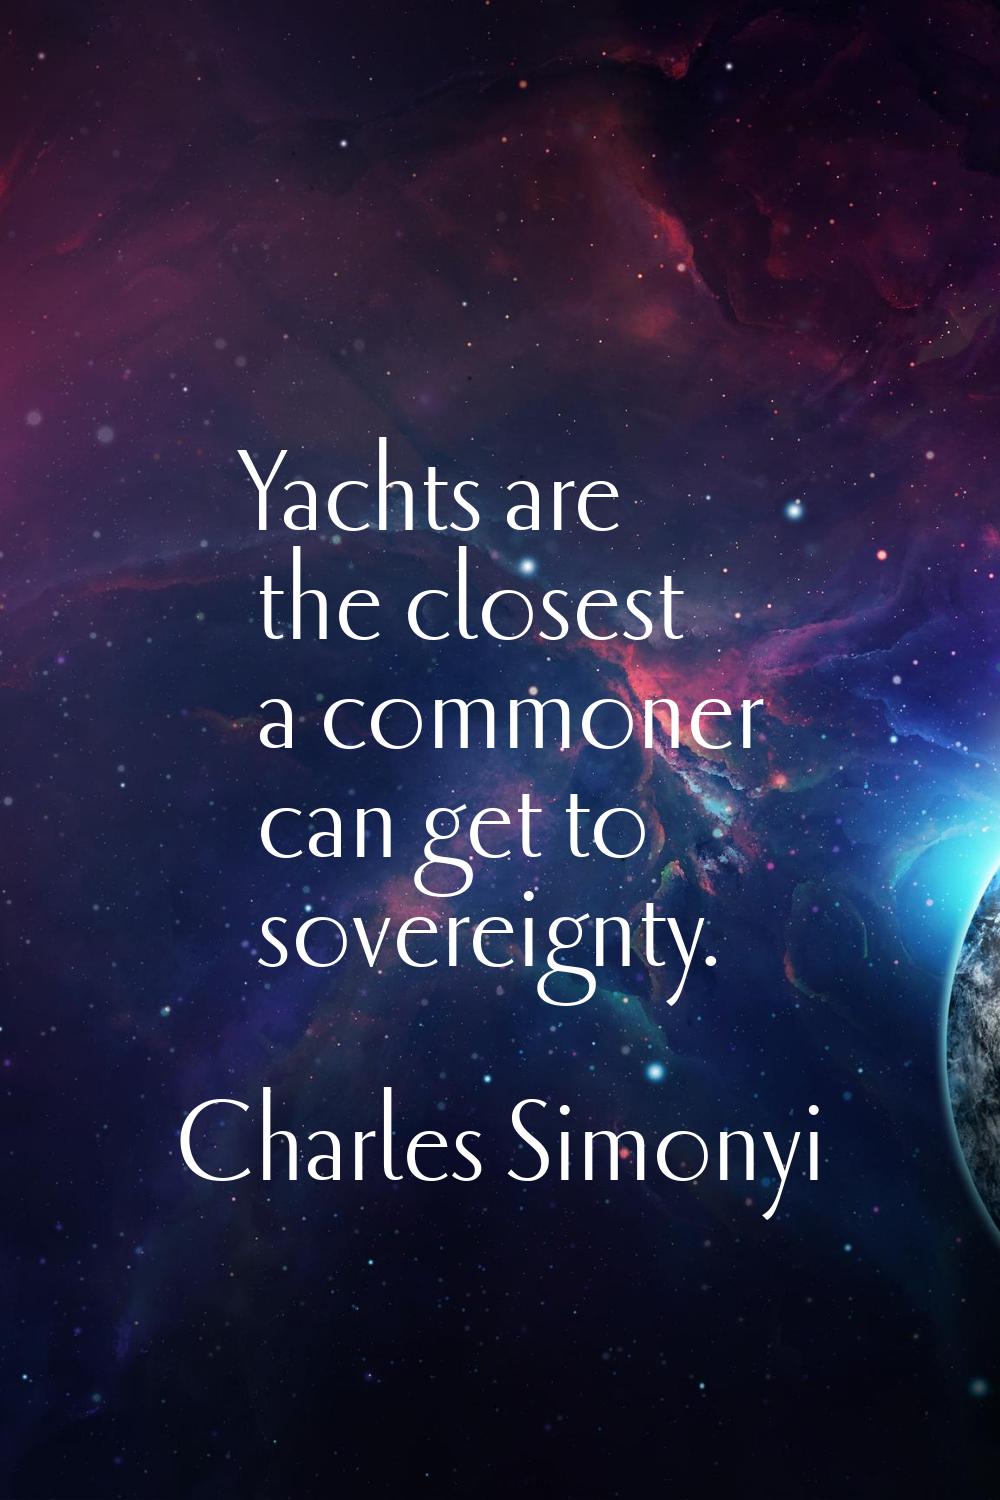 Yachts are the closest a commoner can get to sovereignty.